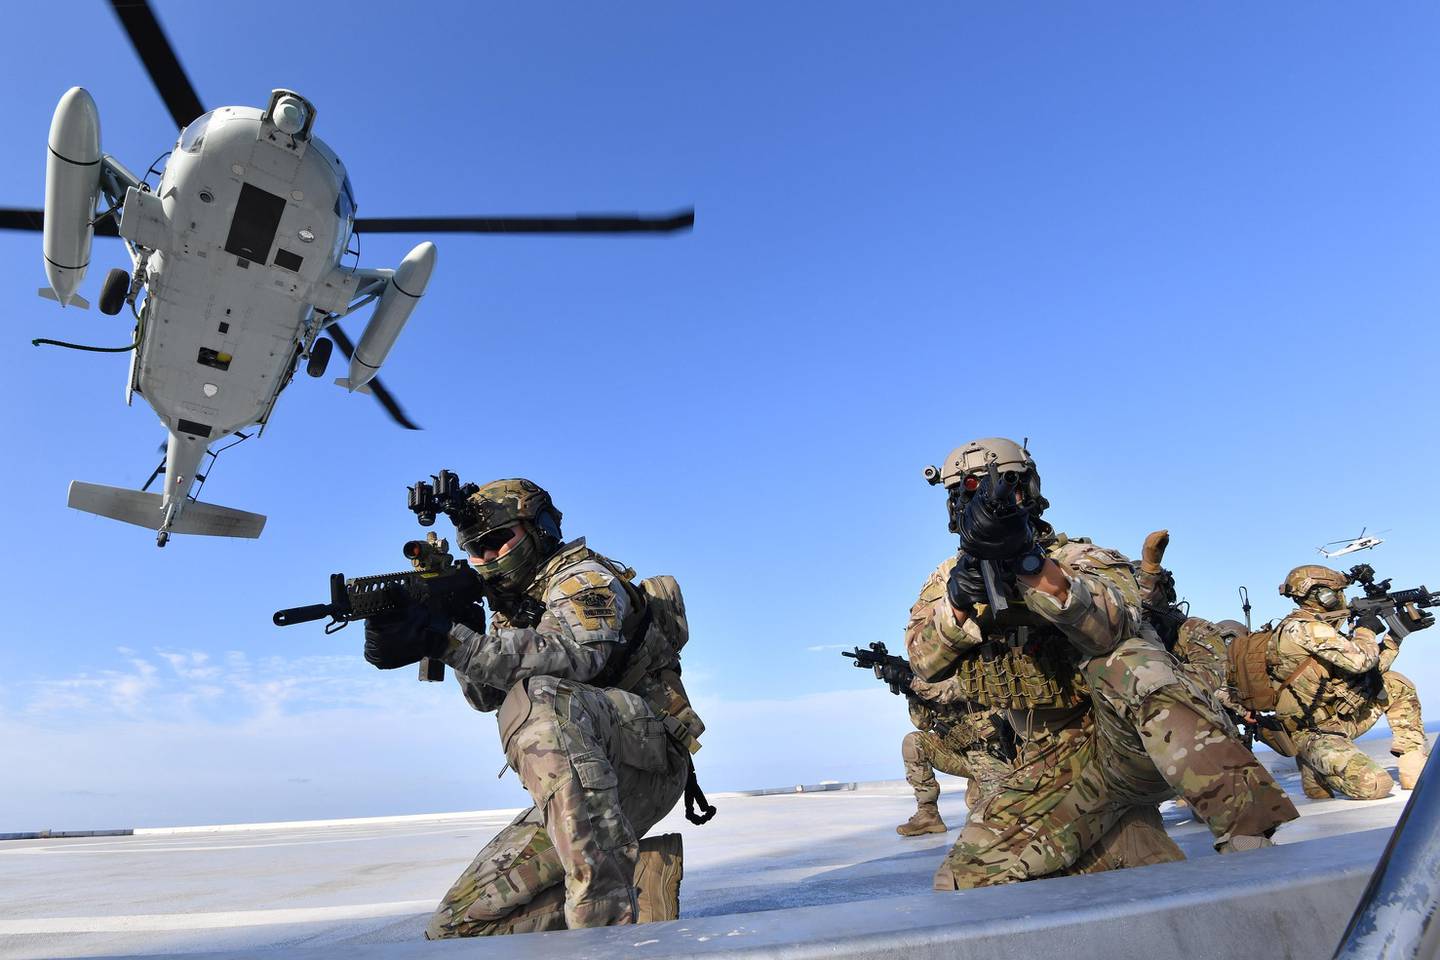 Members of the South Korean Navy's special forces aim their weapons after landing from UH-60 helicopter during a drill on the islets called Dokdo